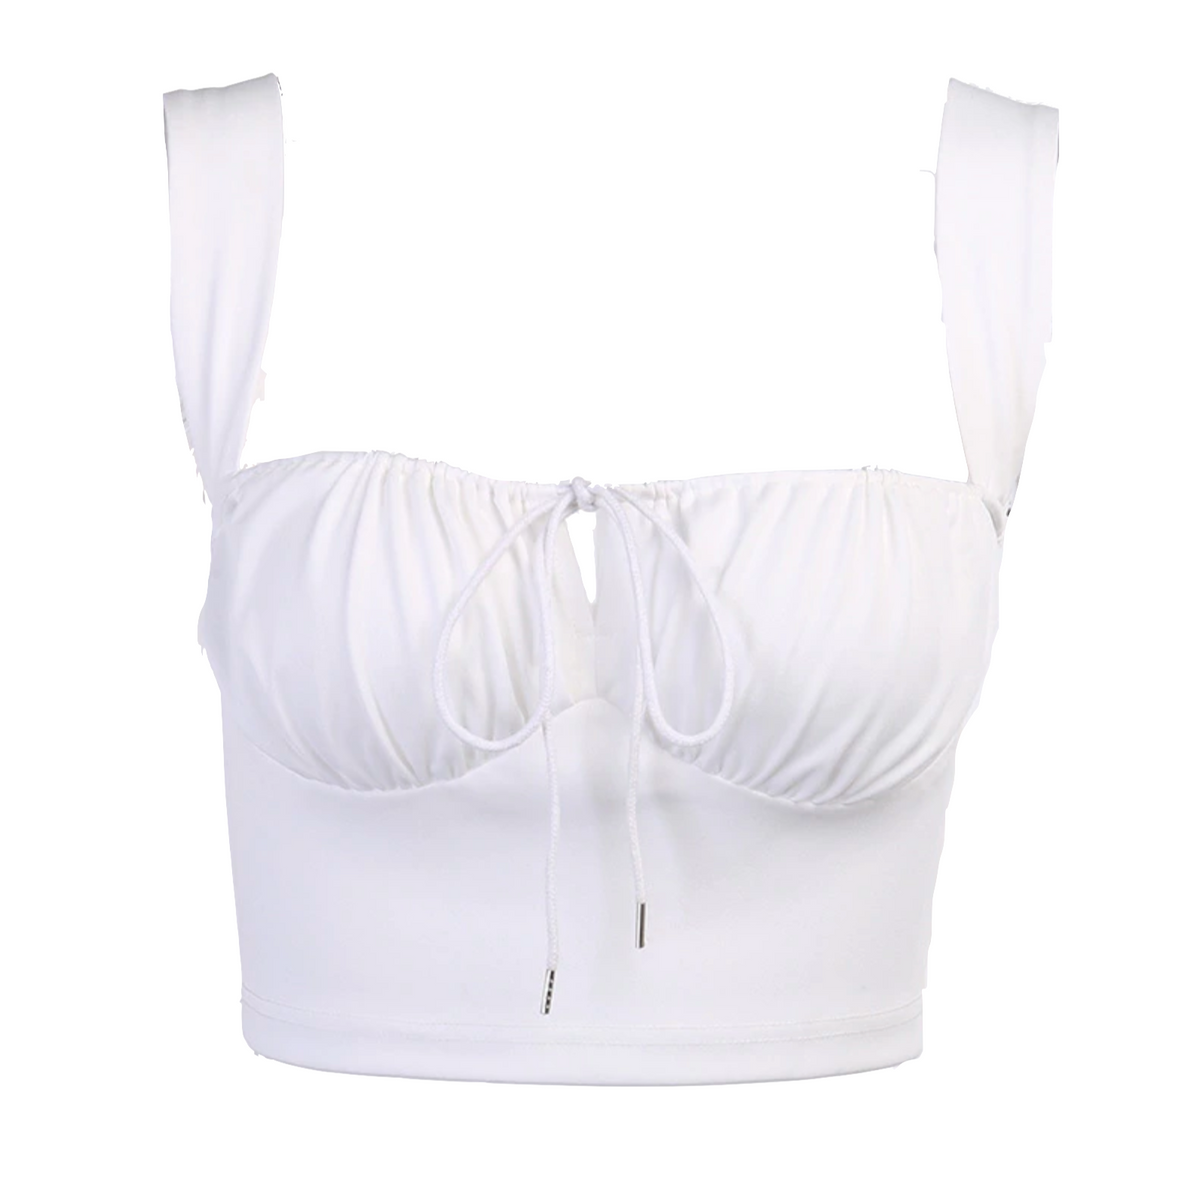 PROVIDENCE CROP TOP – MUSSECCO